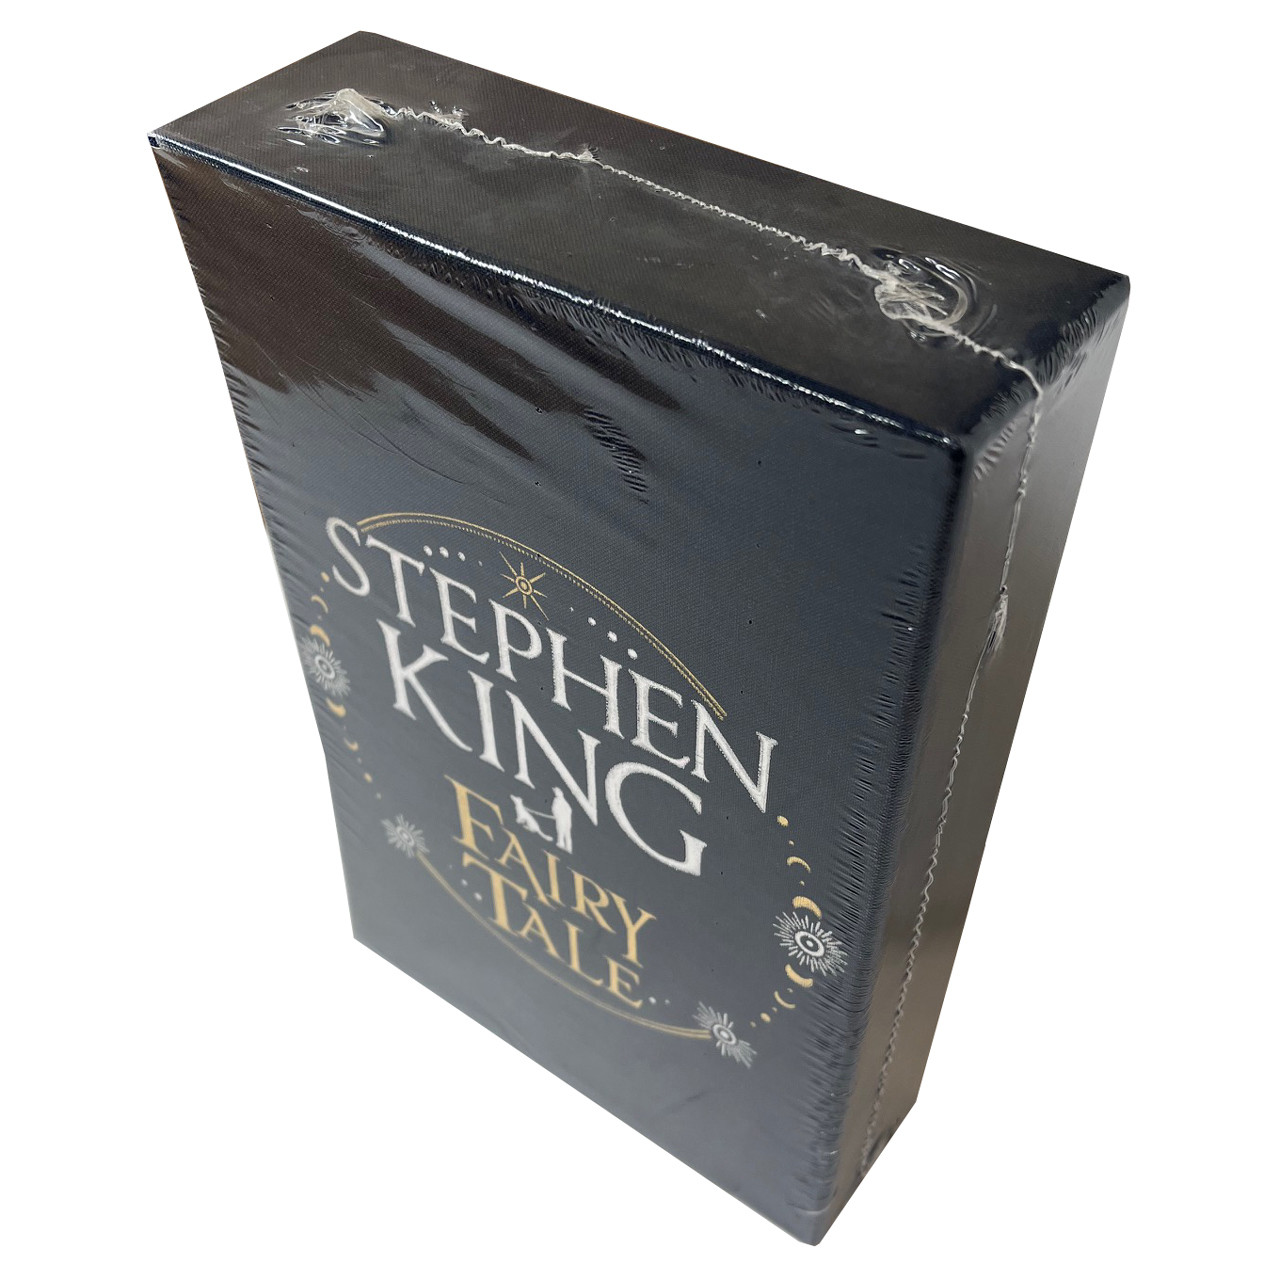 Stephen King "Fairy Tale" Slipcased Signed Limited Deluxe Edition of 200 [Sealed]